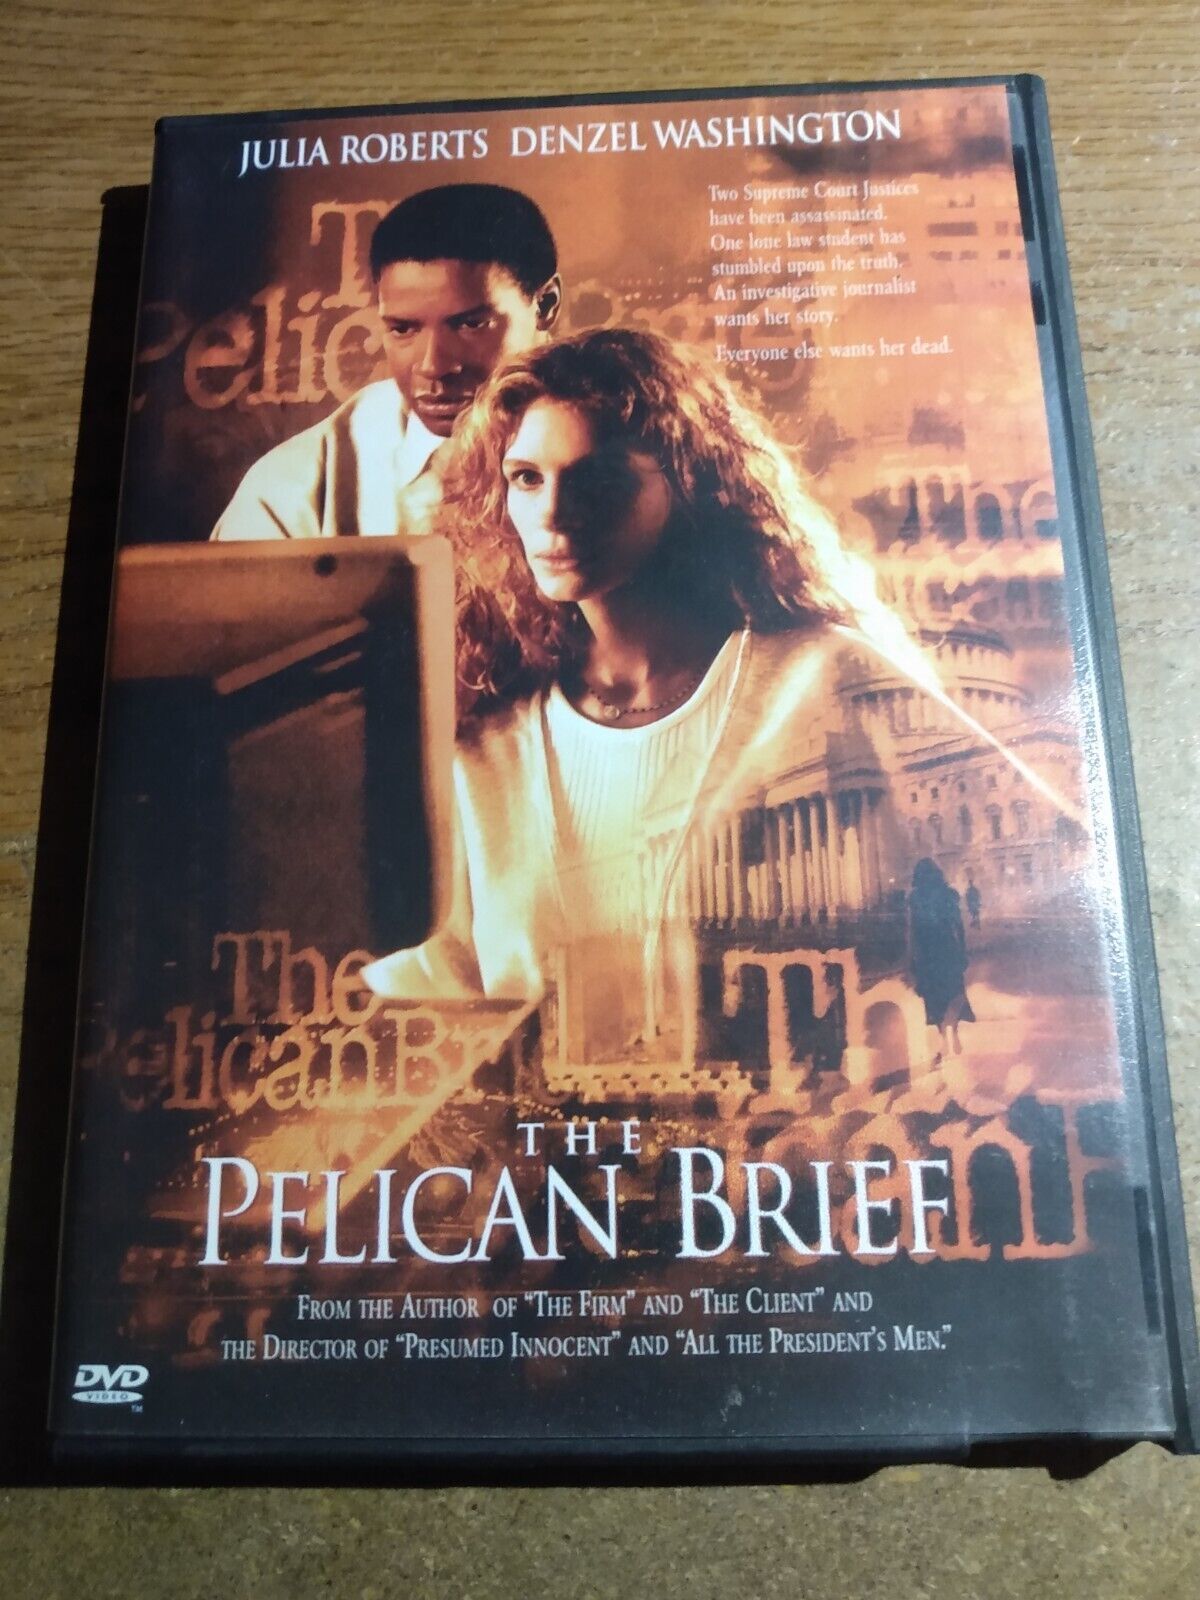 Primary image for The Pelican Brief (DVD, 1997)